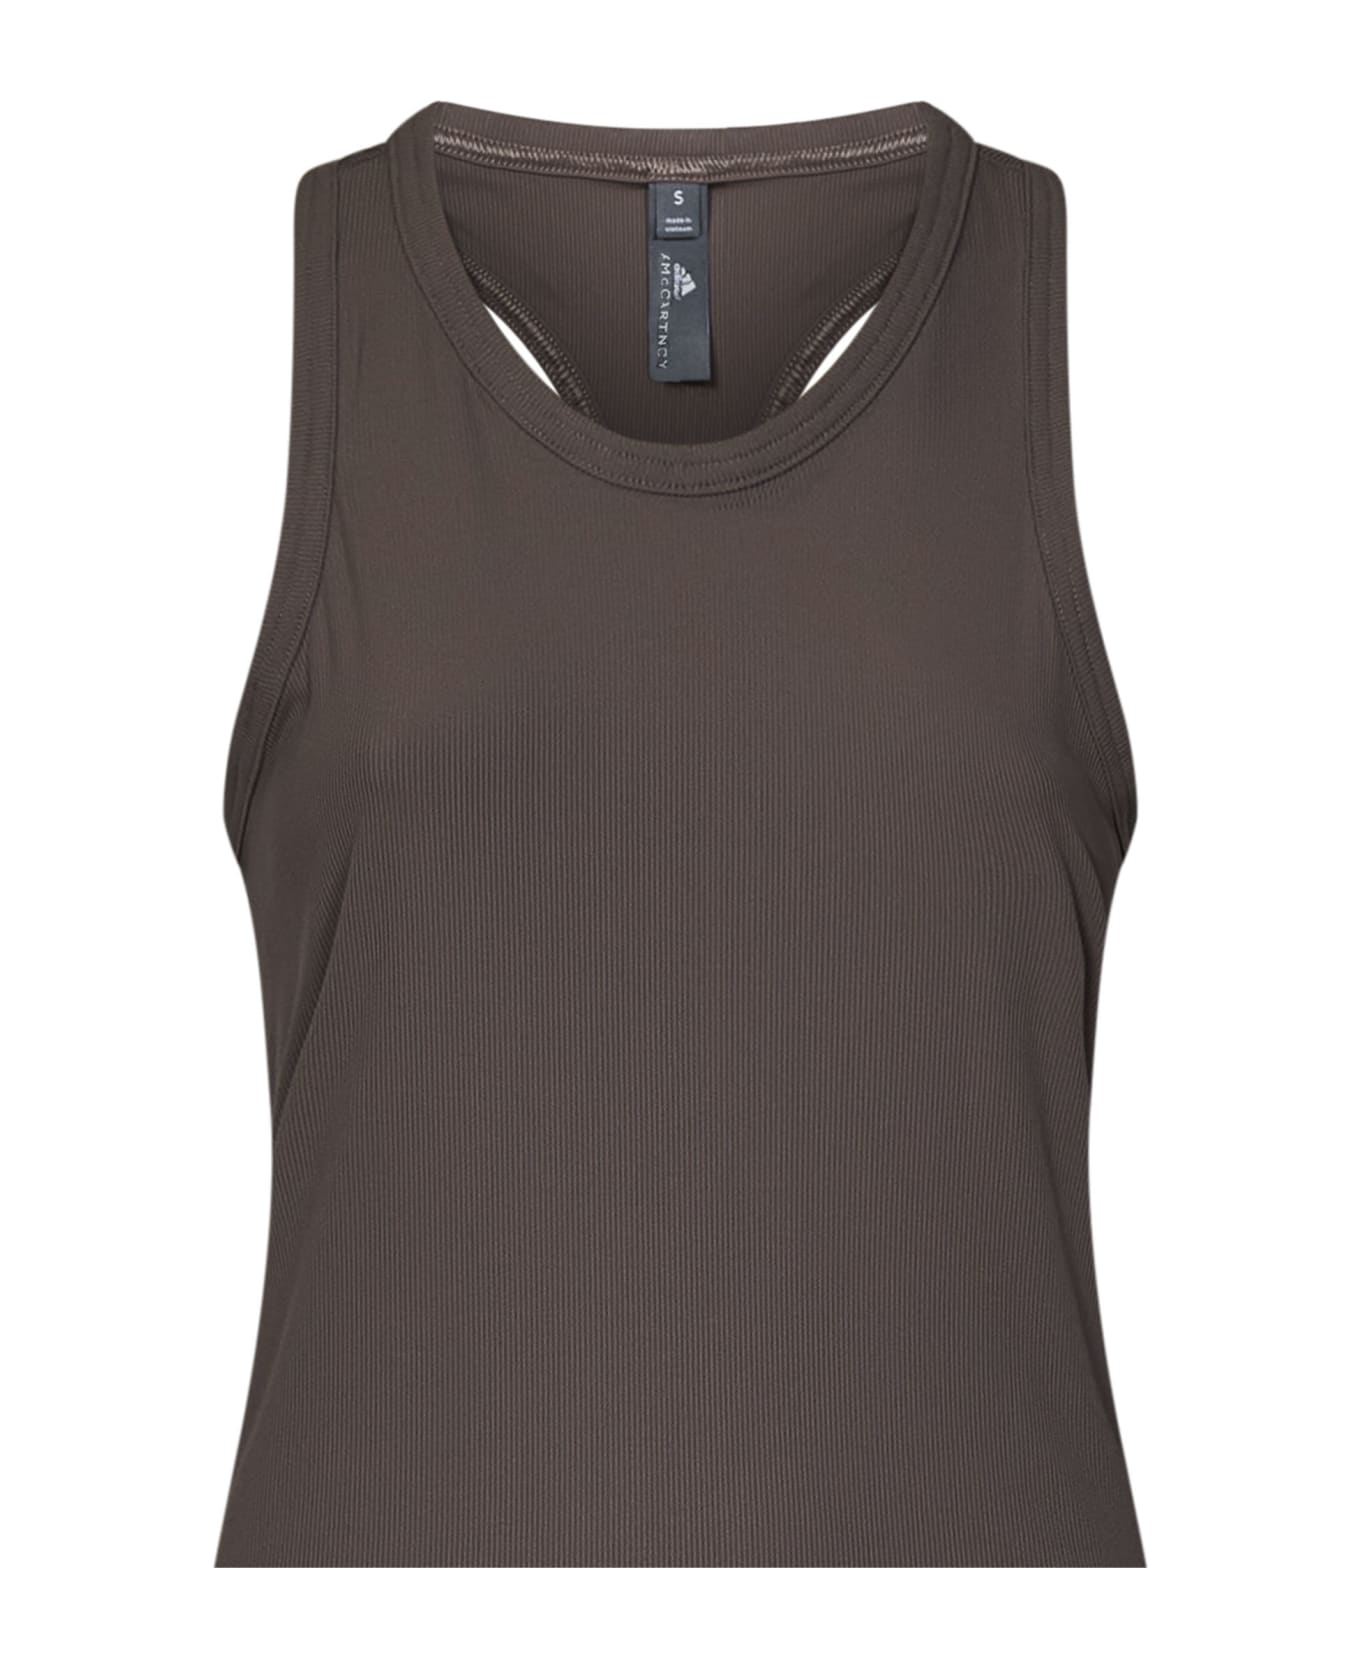 Adidas by Stella McCartney Top - Taupe